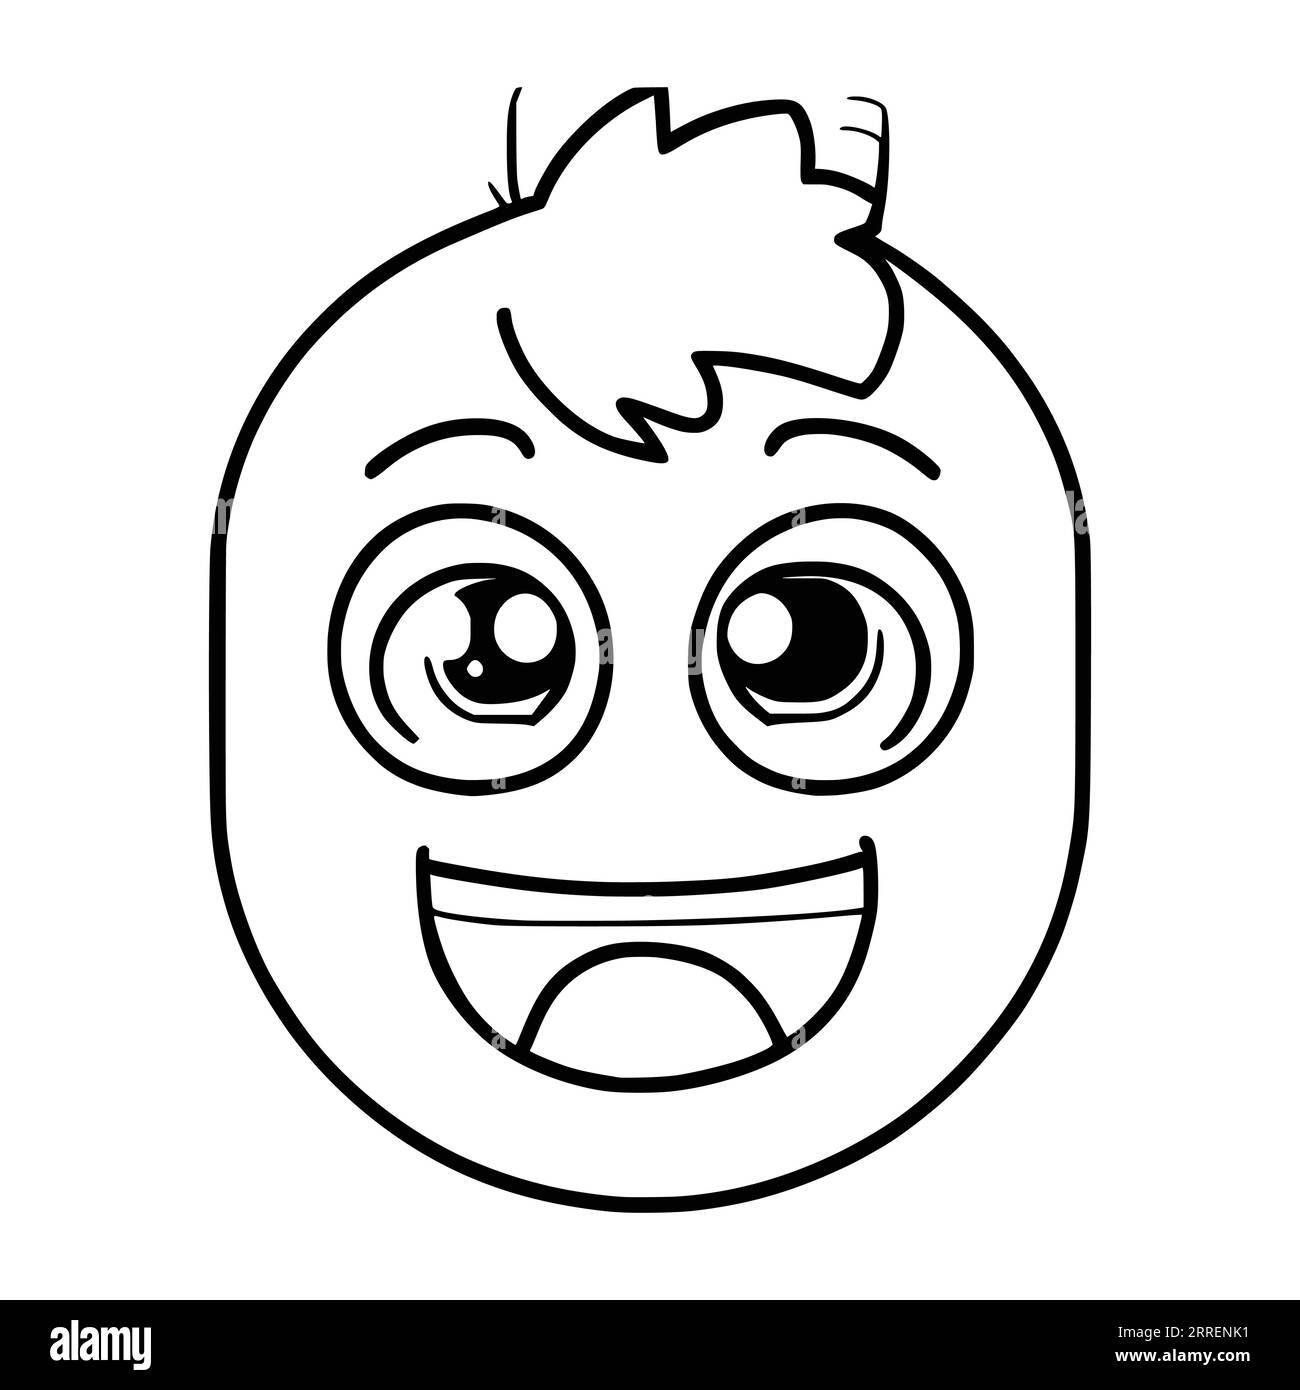 Emoji Coloring Pages For Kids Stock Vector